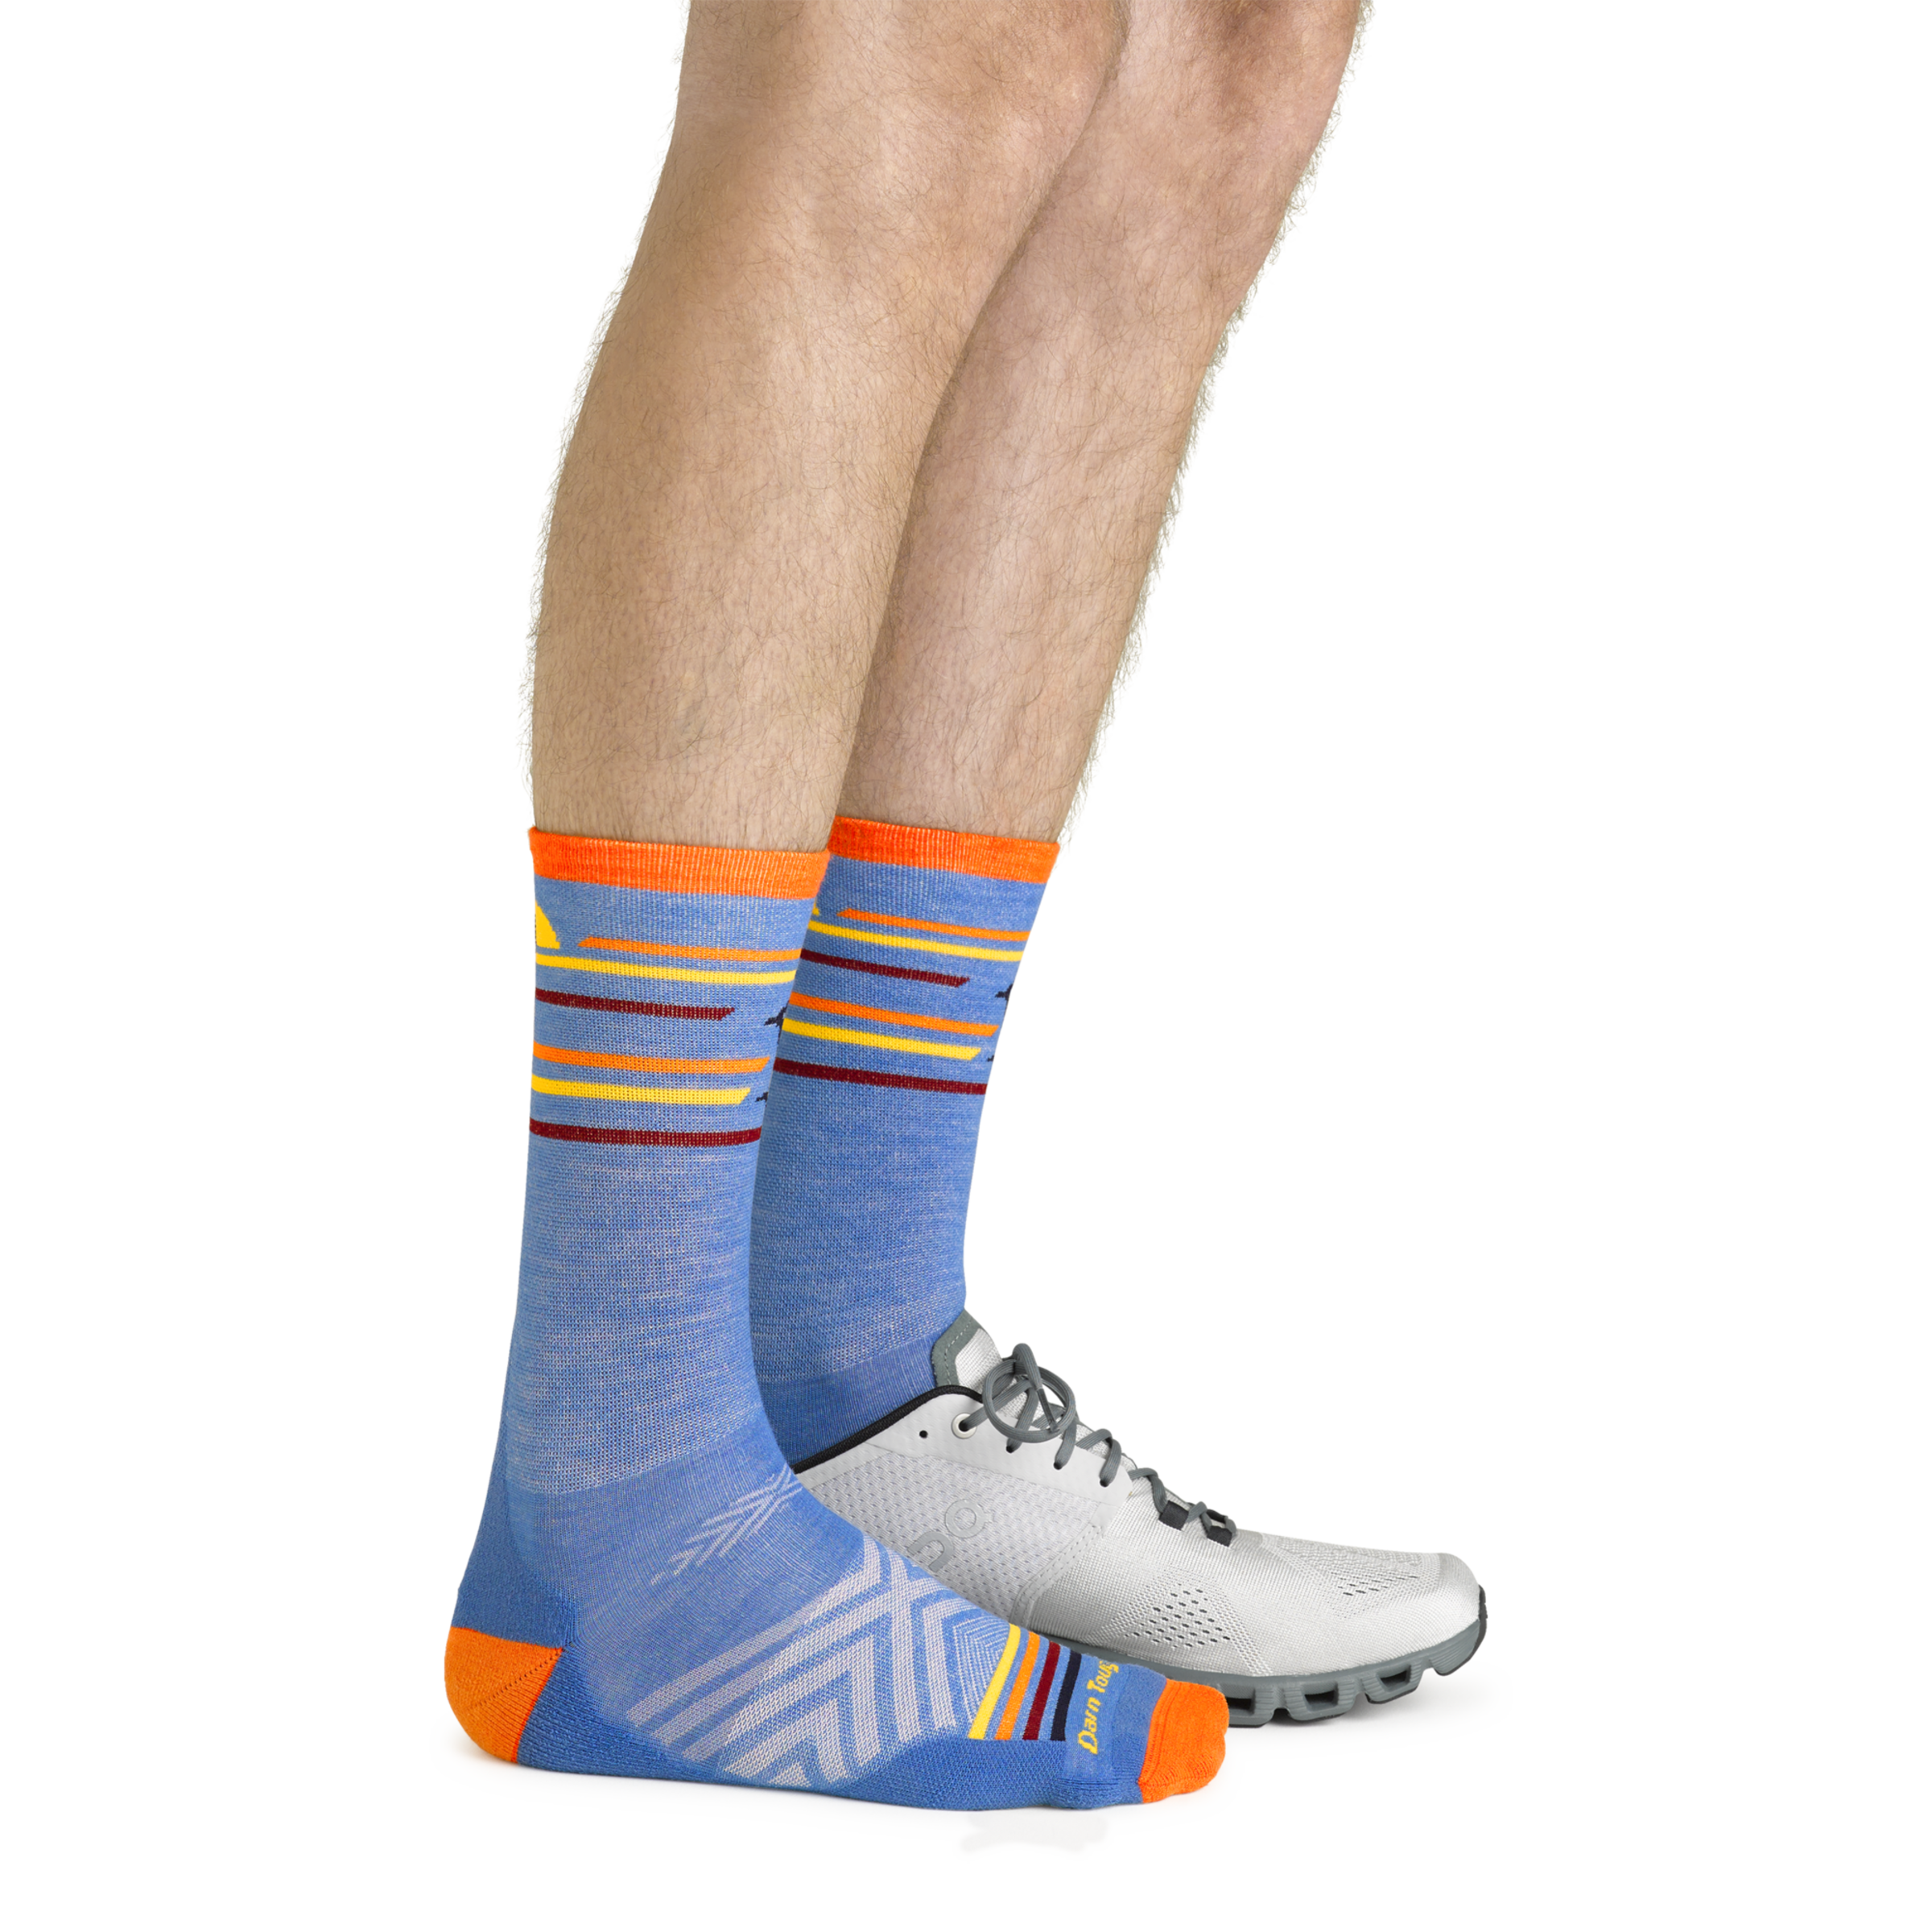 Model wearing the men's frontrunner micro crew running socks in surf blue with a white sneaker on his left foot